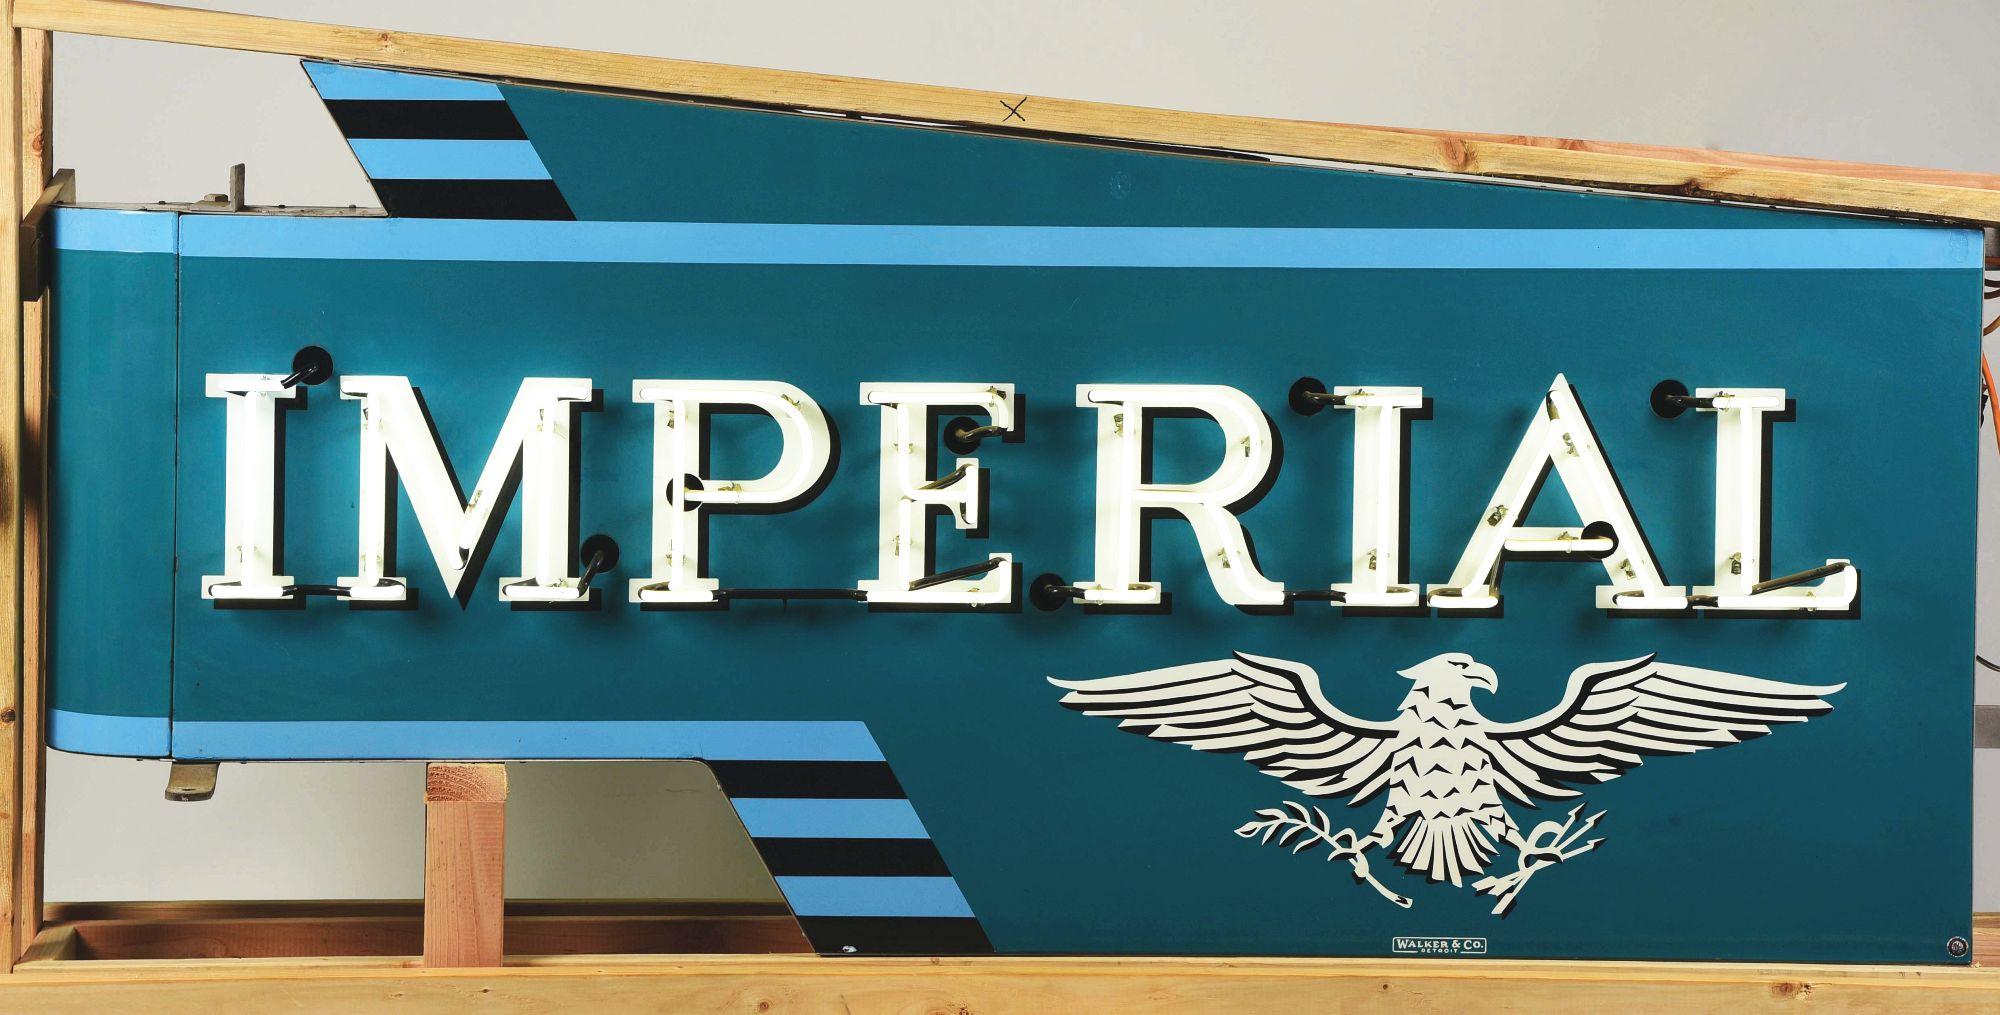 RARE & OUTSTANDING IMPERIAL AUTOMOBILES PORCELAIN & NEON DEALERSHIP SIGN W/ BULLNOSE ATTACHMENT.